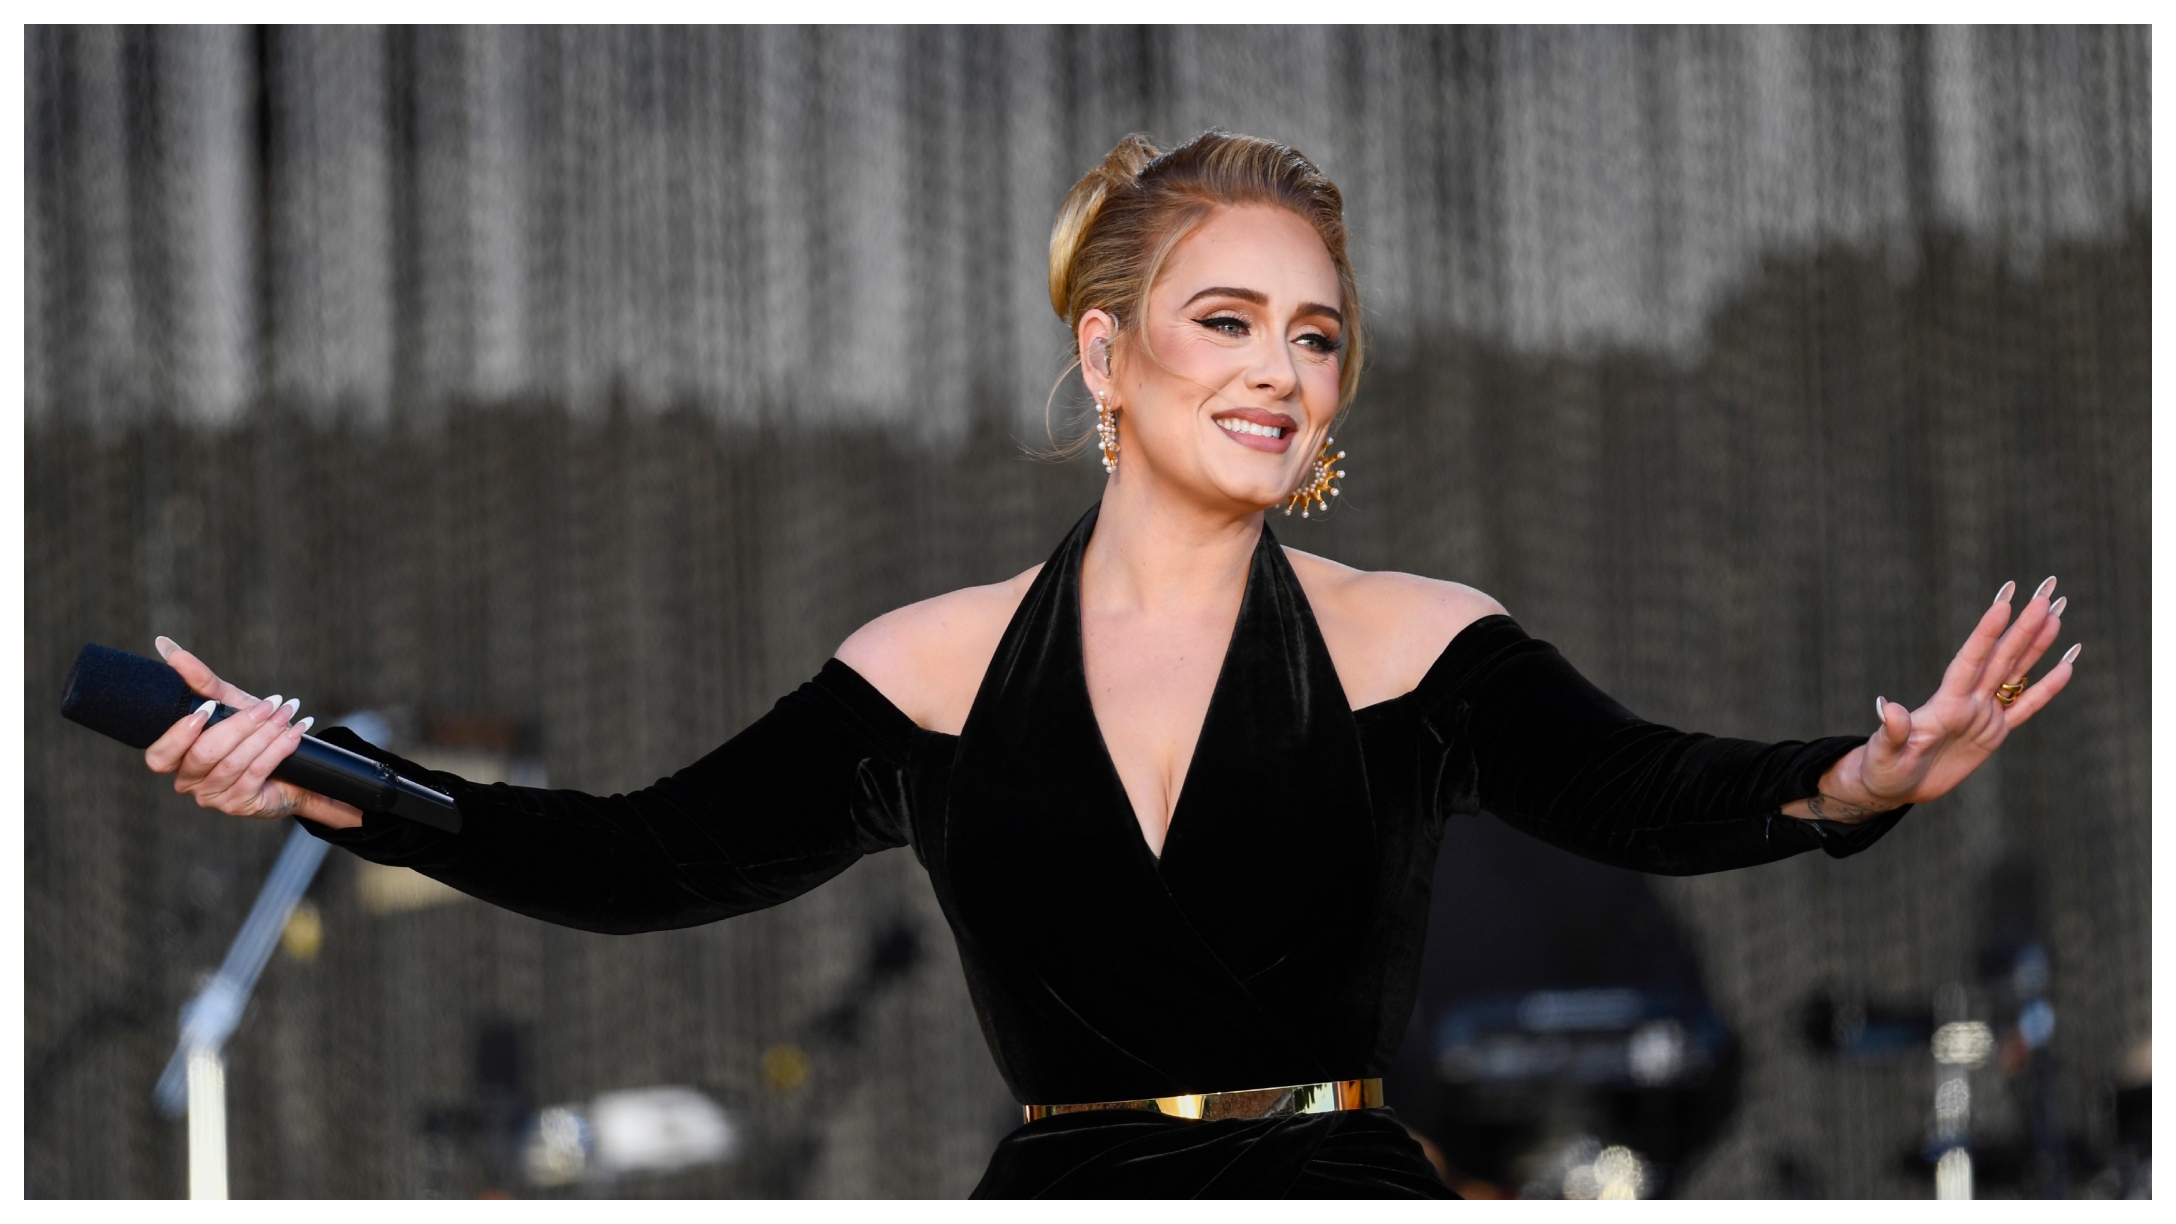 Adele Easy On Me: 'There's still a stigma about getting divorced when  young' - BBC News